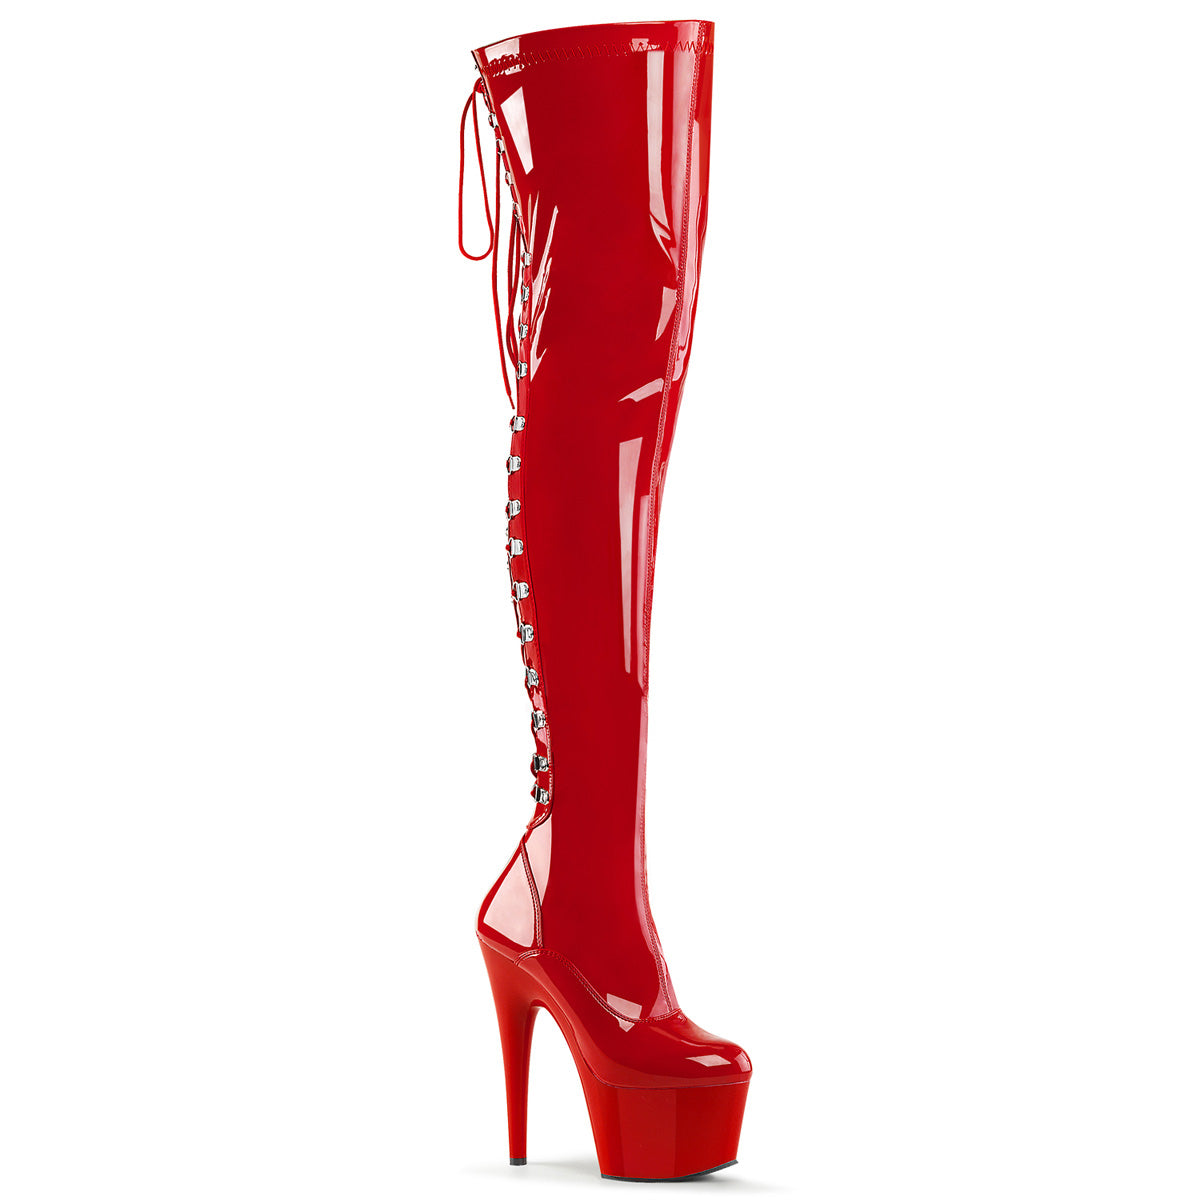 ADORE-3063 7 Inch Thigh High Boots